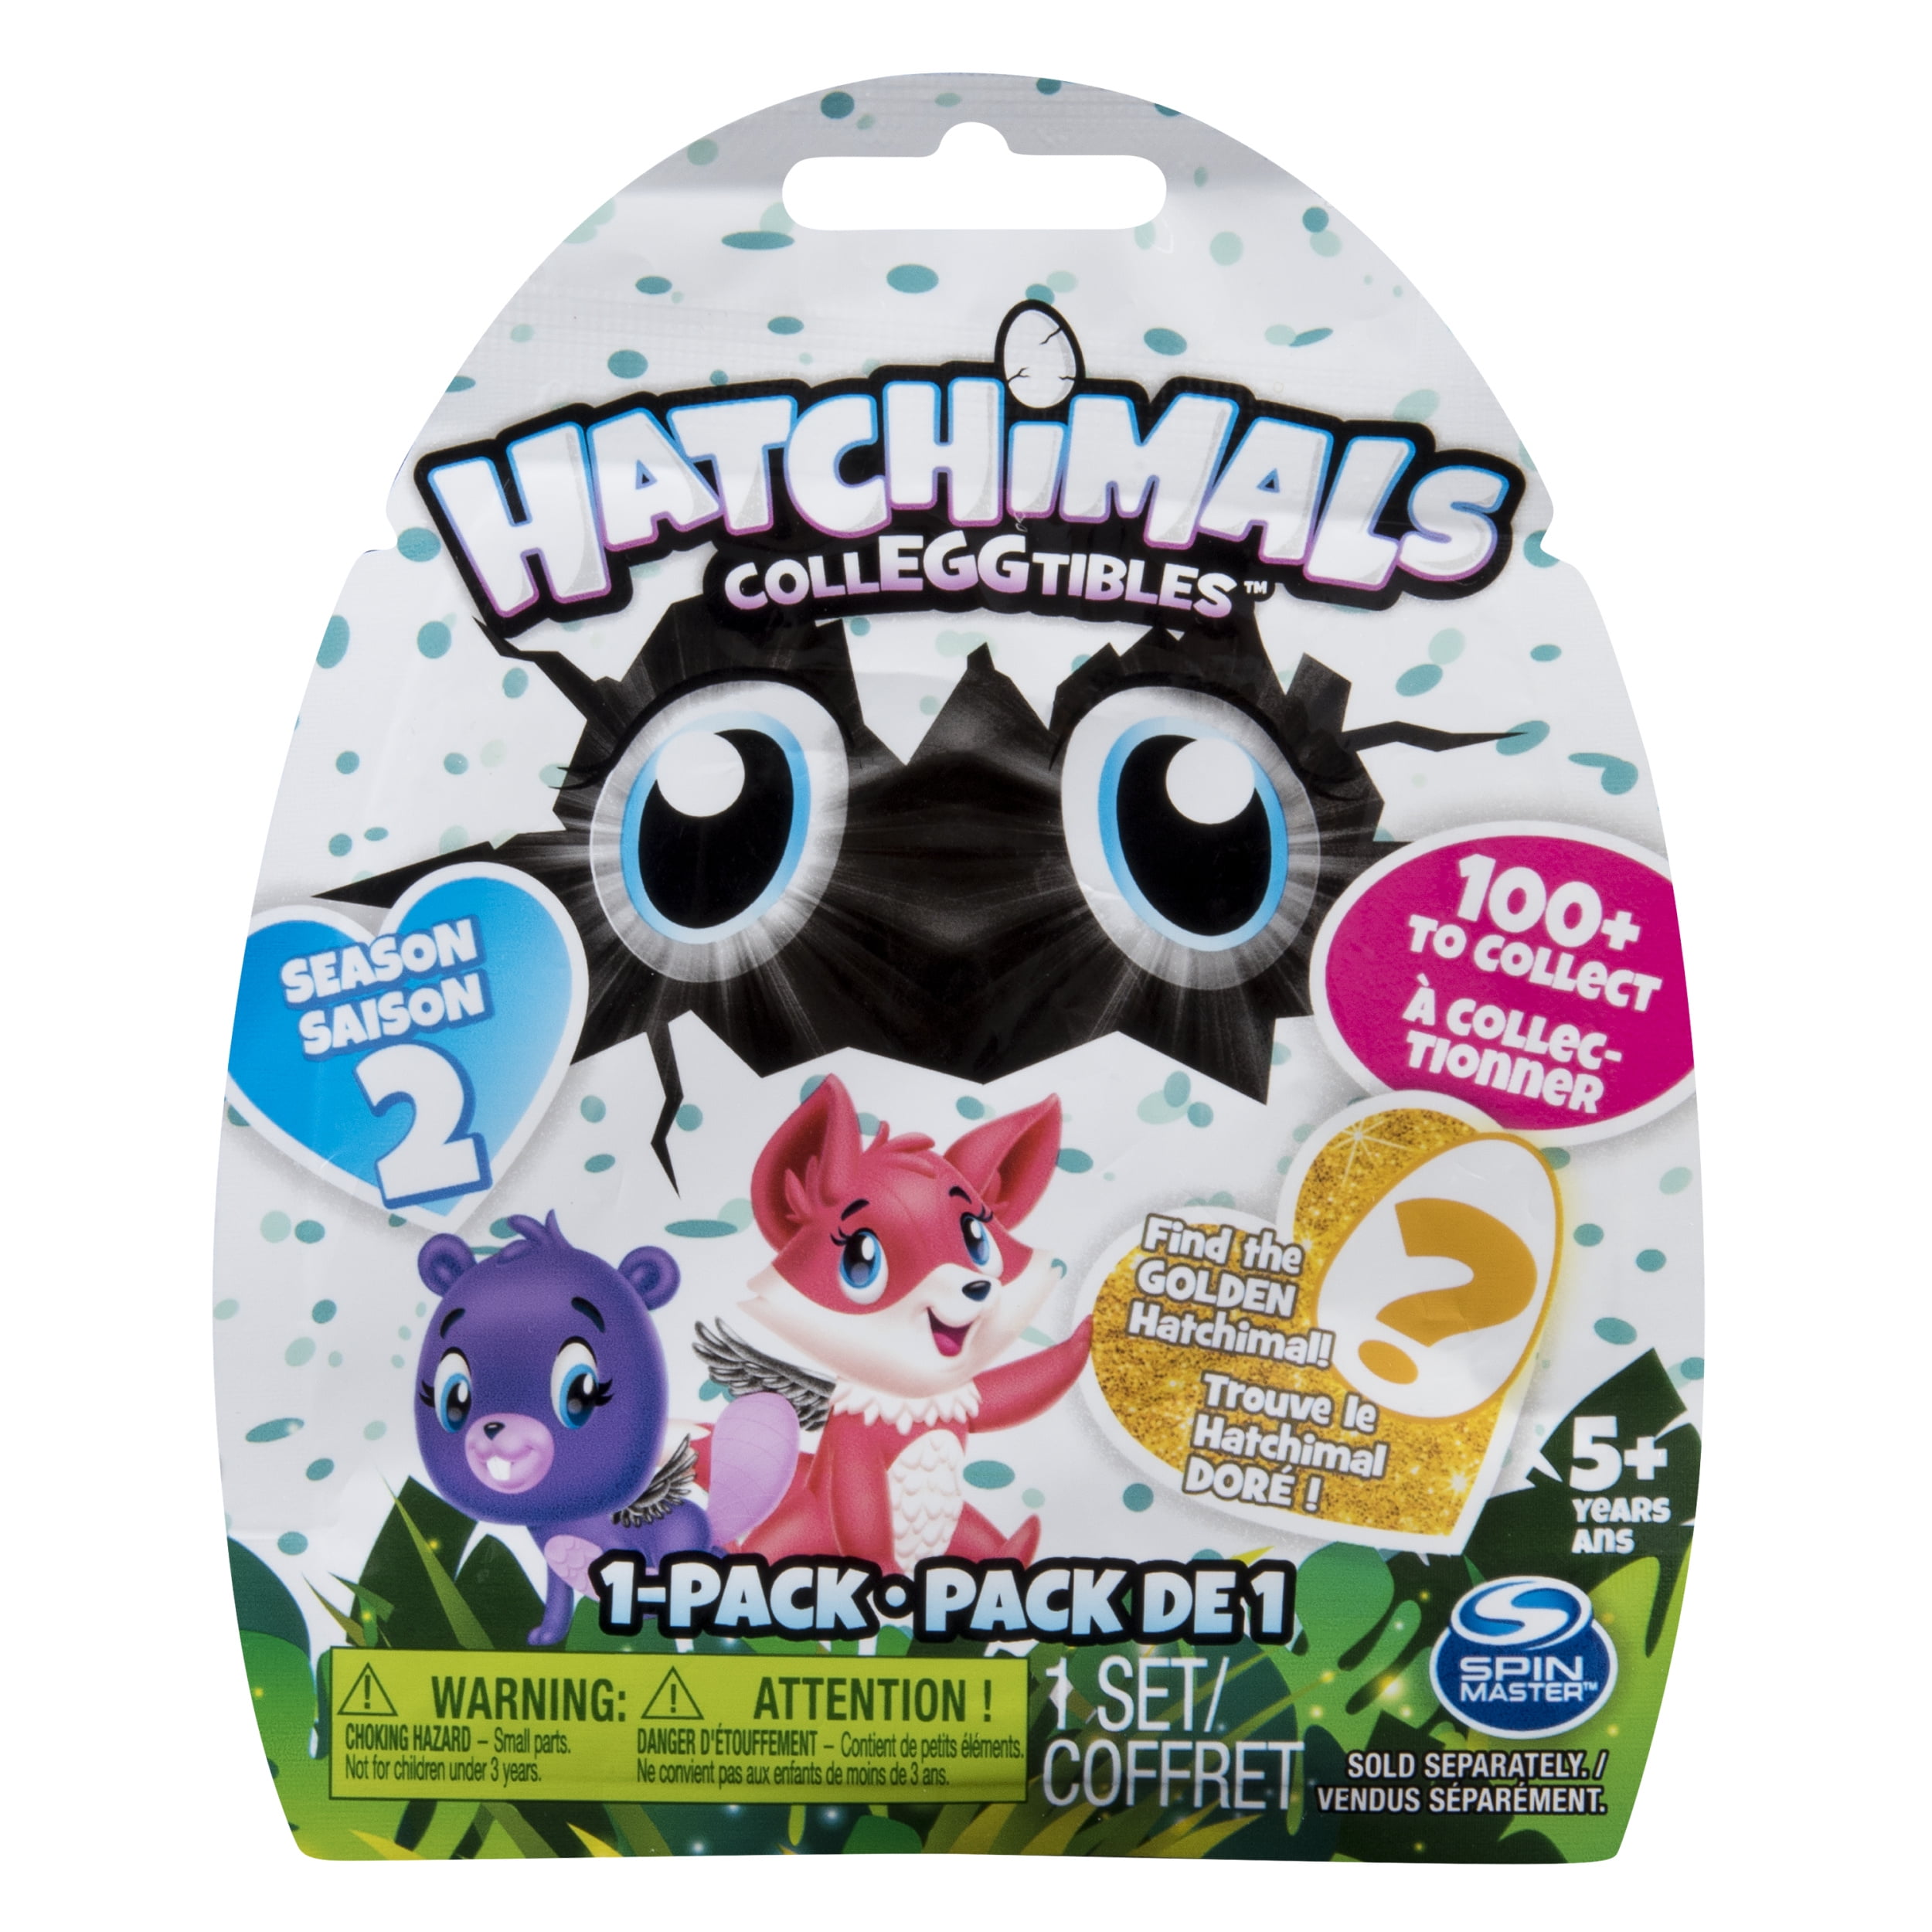 Chance at Finding *THE GOLDEN HATCHIMAL* Hatchimals CollEGGtibles SEASON TWO 